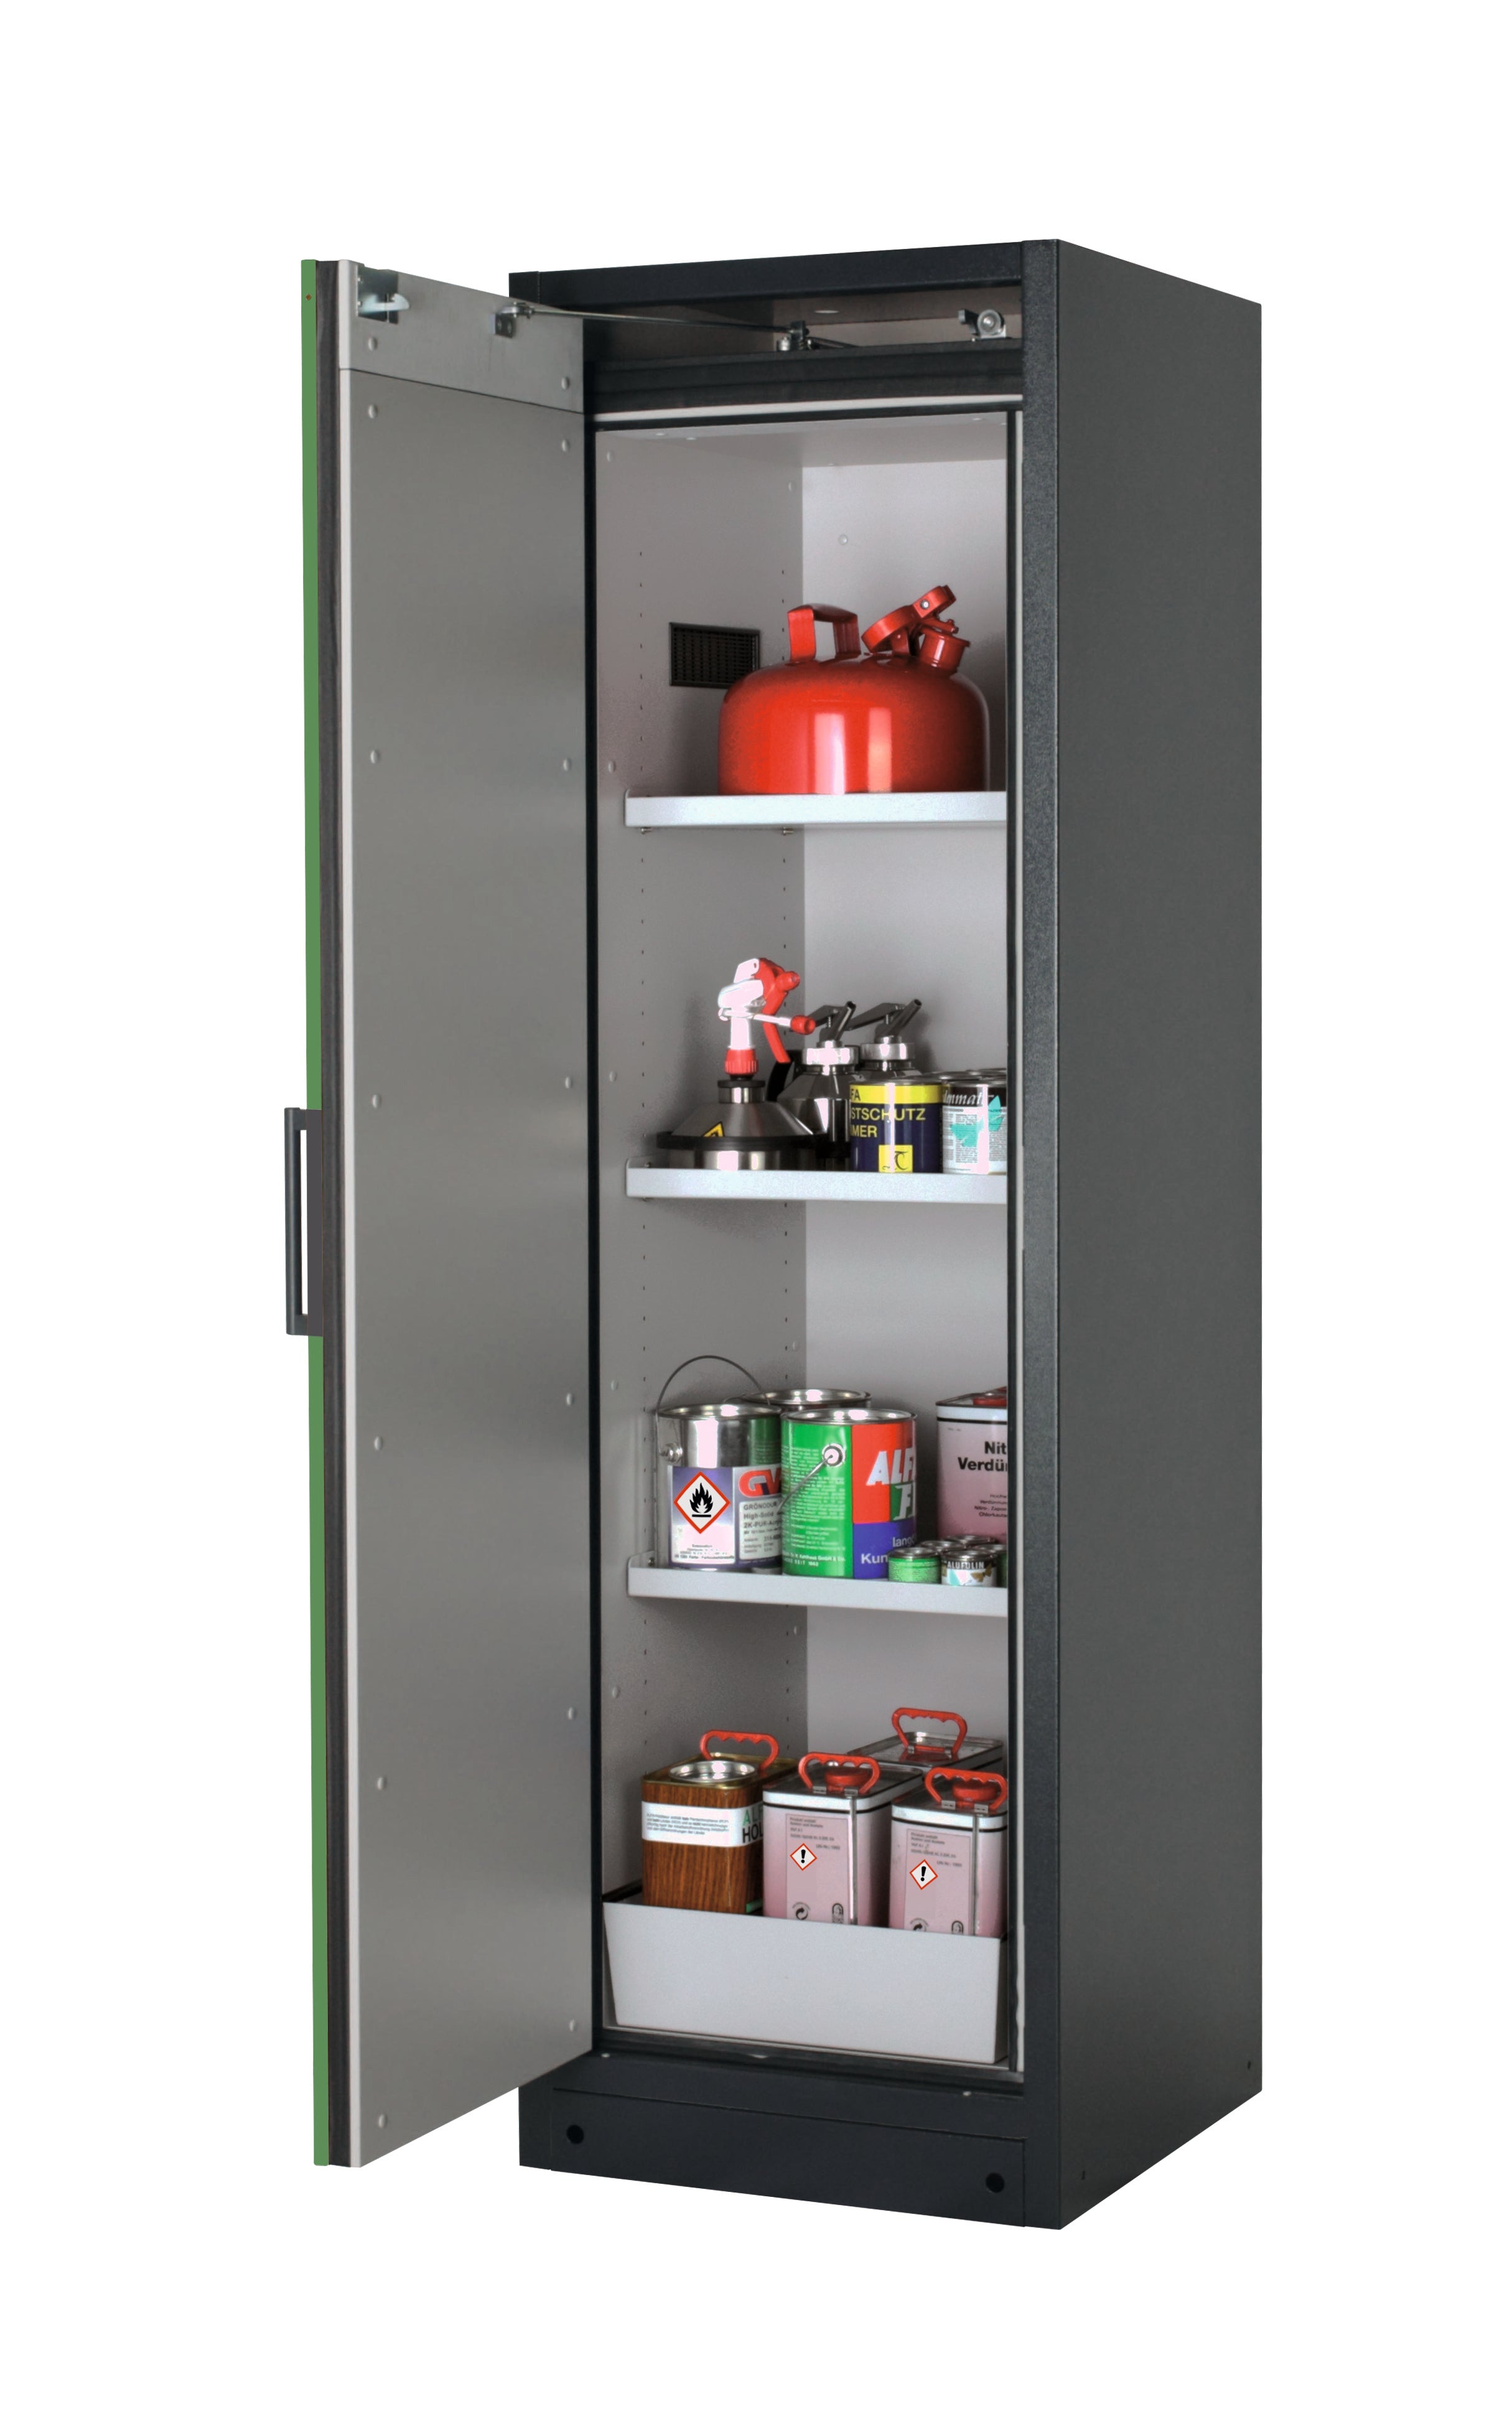 Type 90 safety storage cabinet Q-CLASSIC-90 model Q90.195.060 in reseda green RAL 6011 with 3x shelf standard (sheet steel),